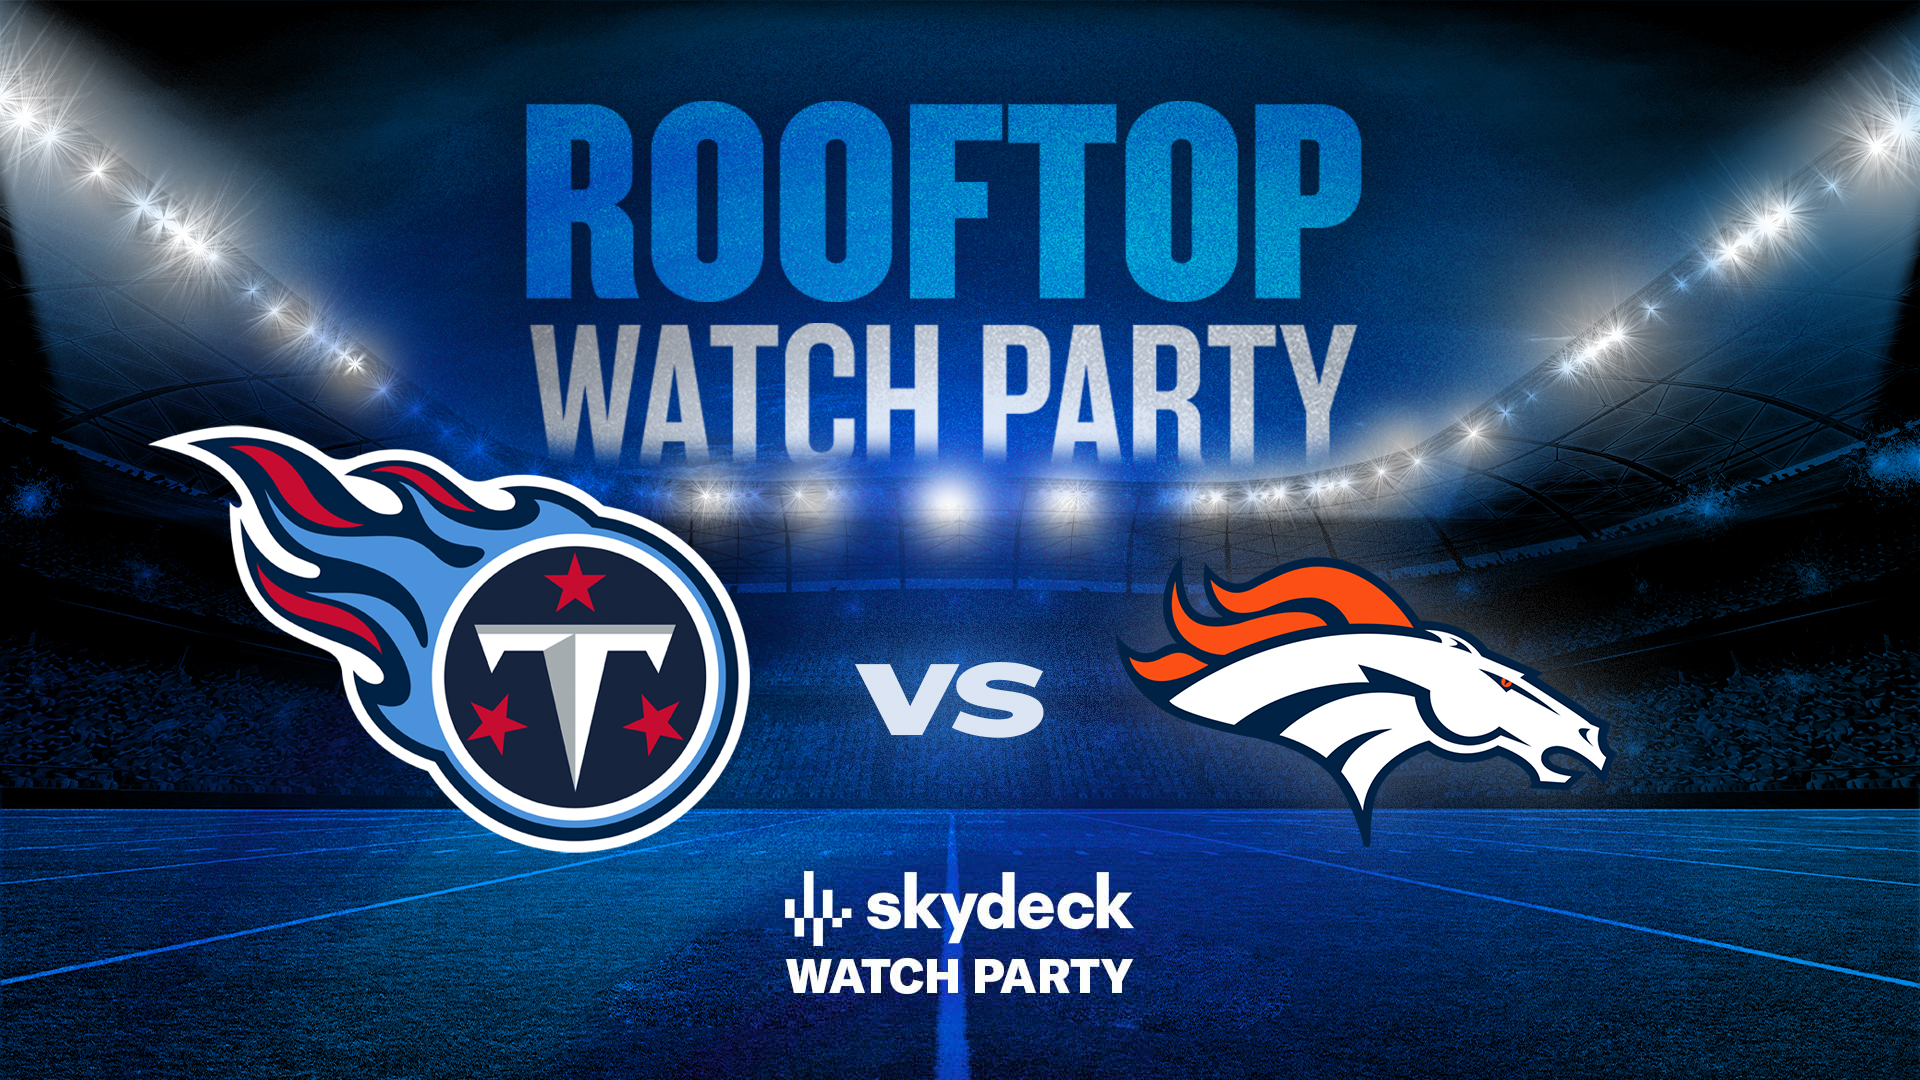 Promo image of Titans vs. Broncos | Skydeck Watch Party